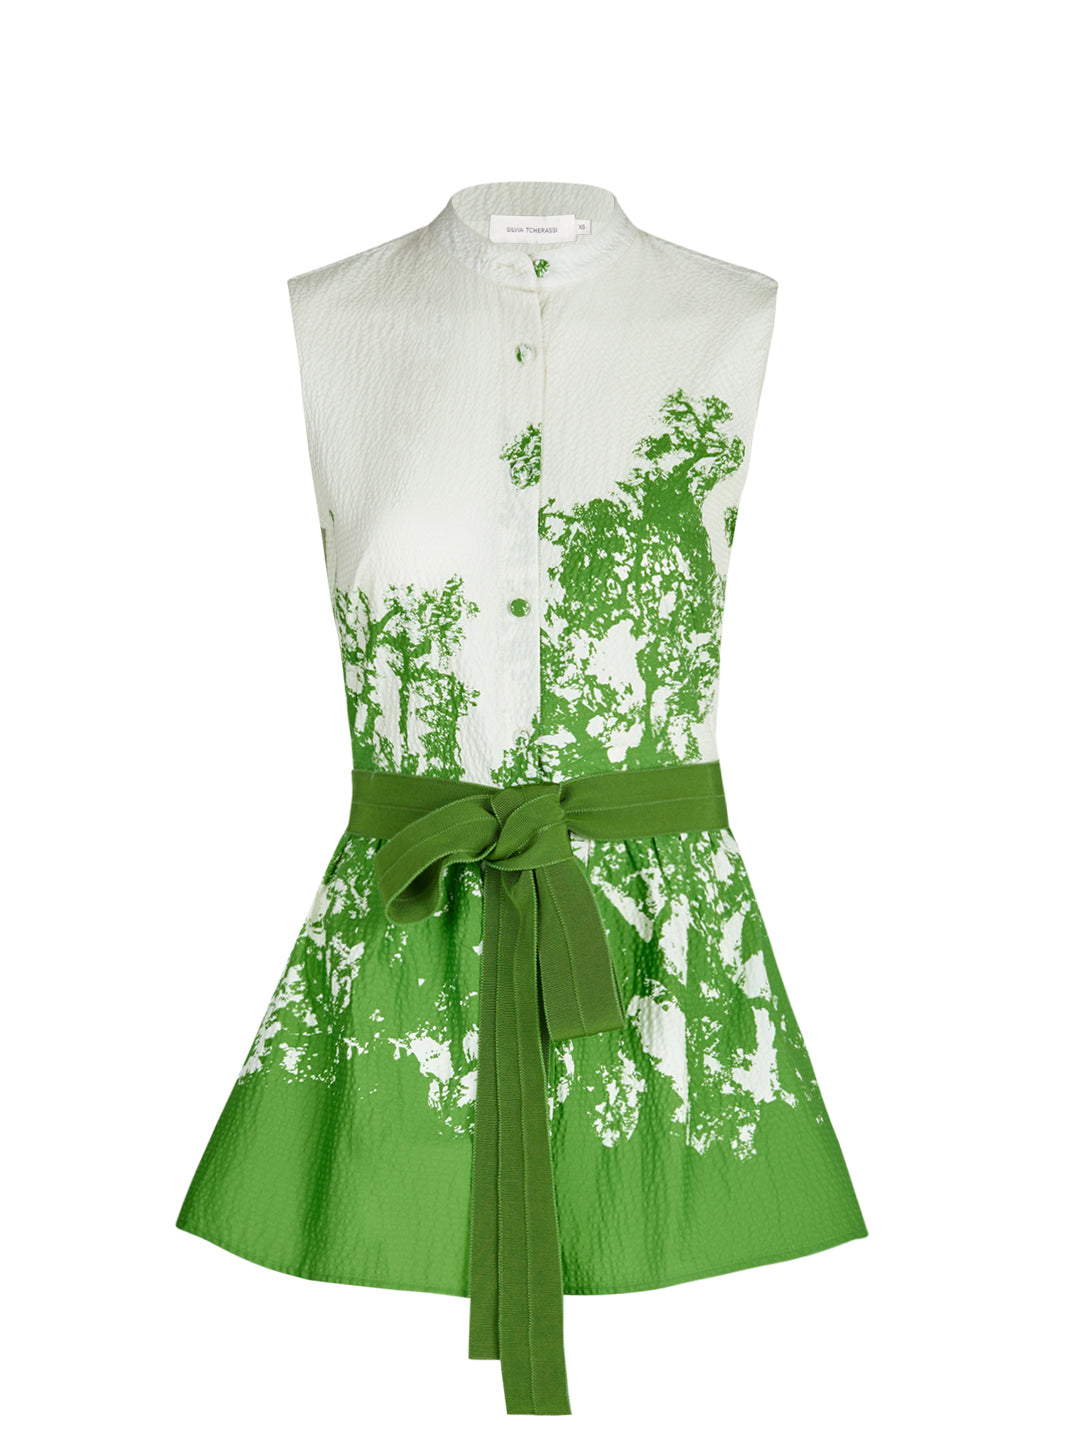 A Colony Blouse Green Cyprus in green and white with a green belt, made of cotton.